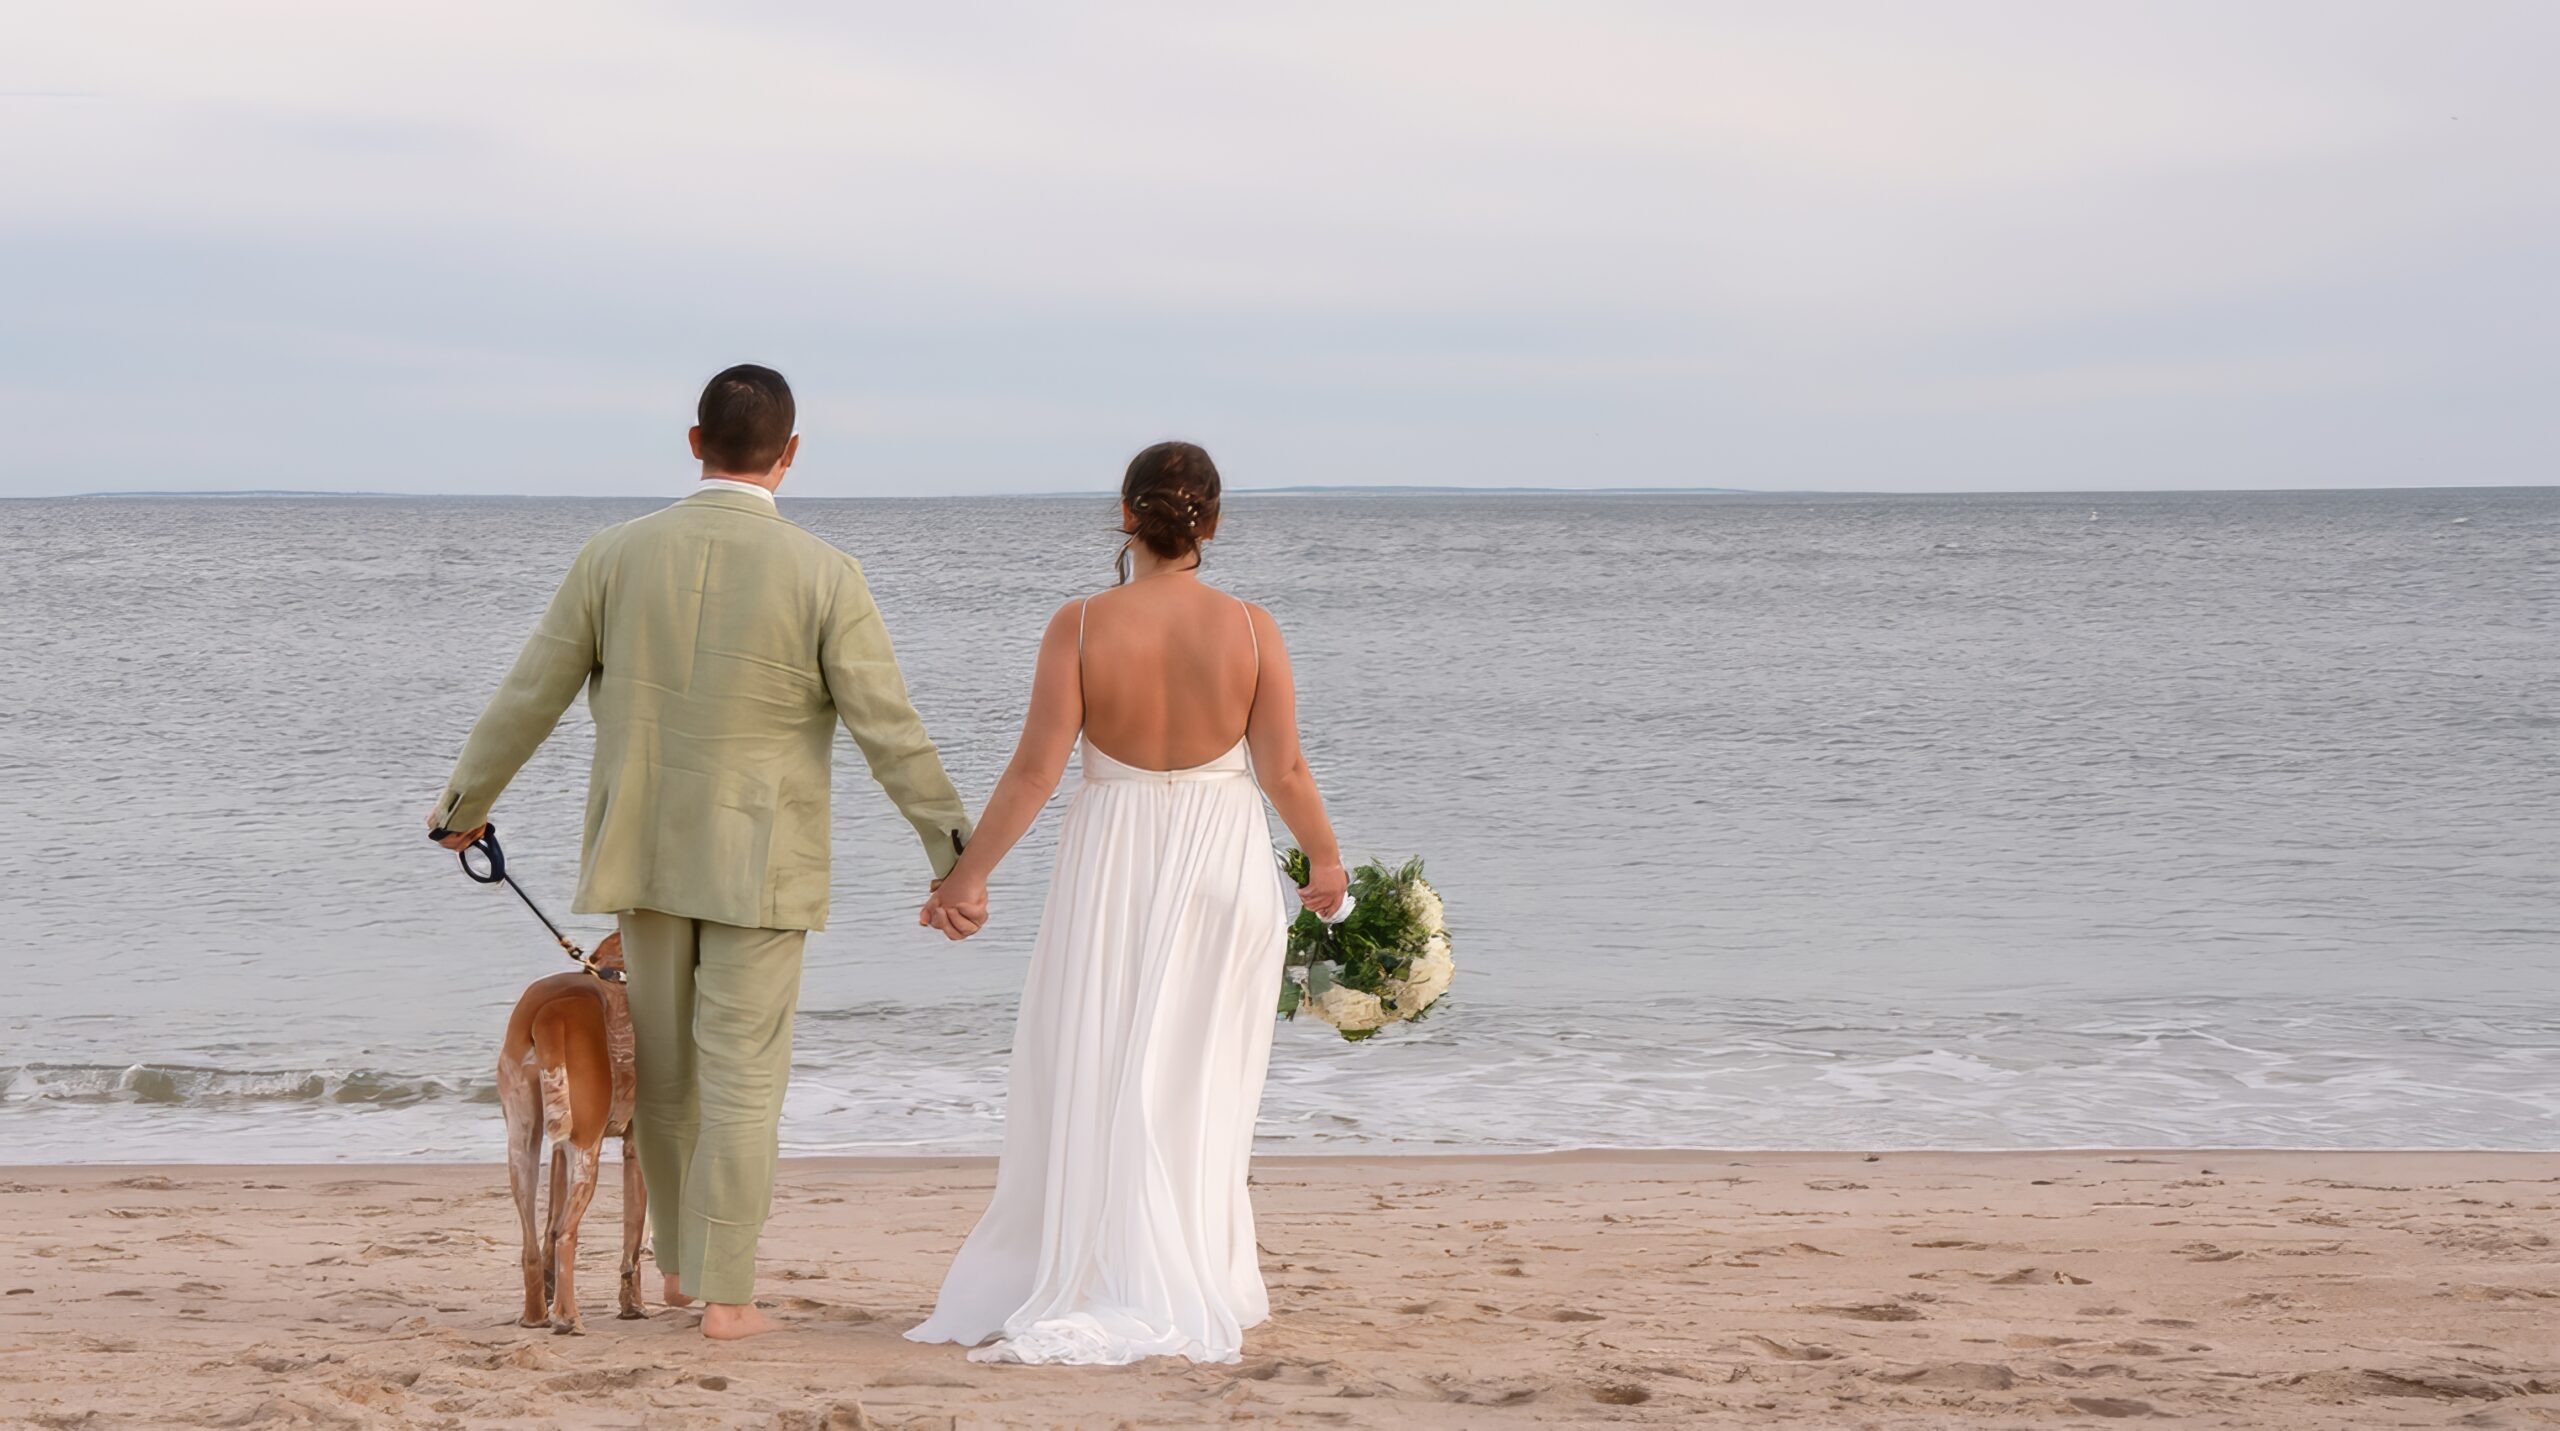 A man in a light green suit walking towards the ocean with a woman in a white dress. To the left the man has a dog on a leash walking beside him. The dog is brown. In the woman's right hand she holds a bouquet to her side